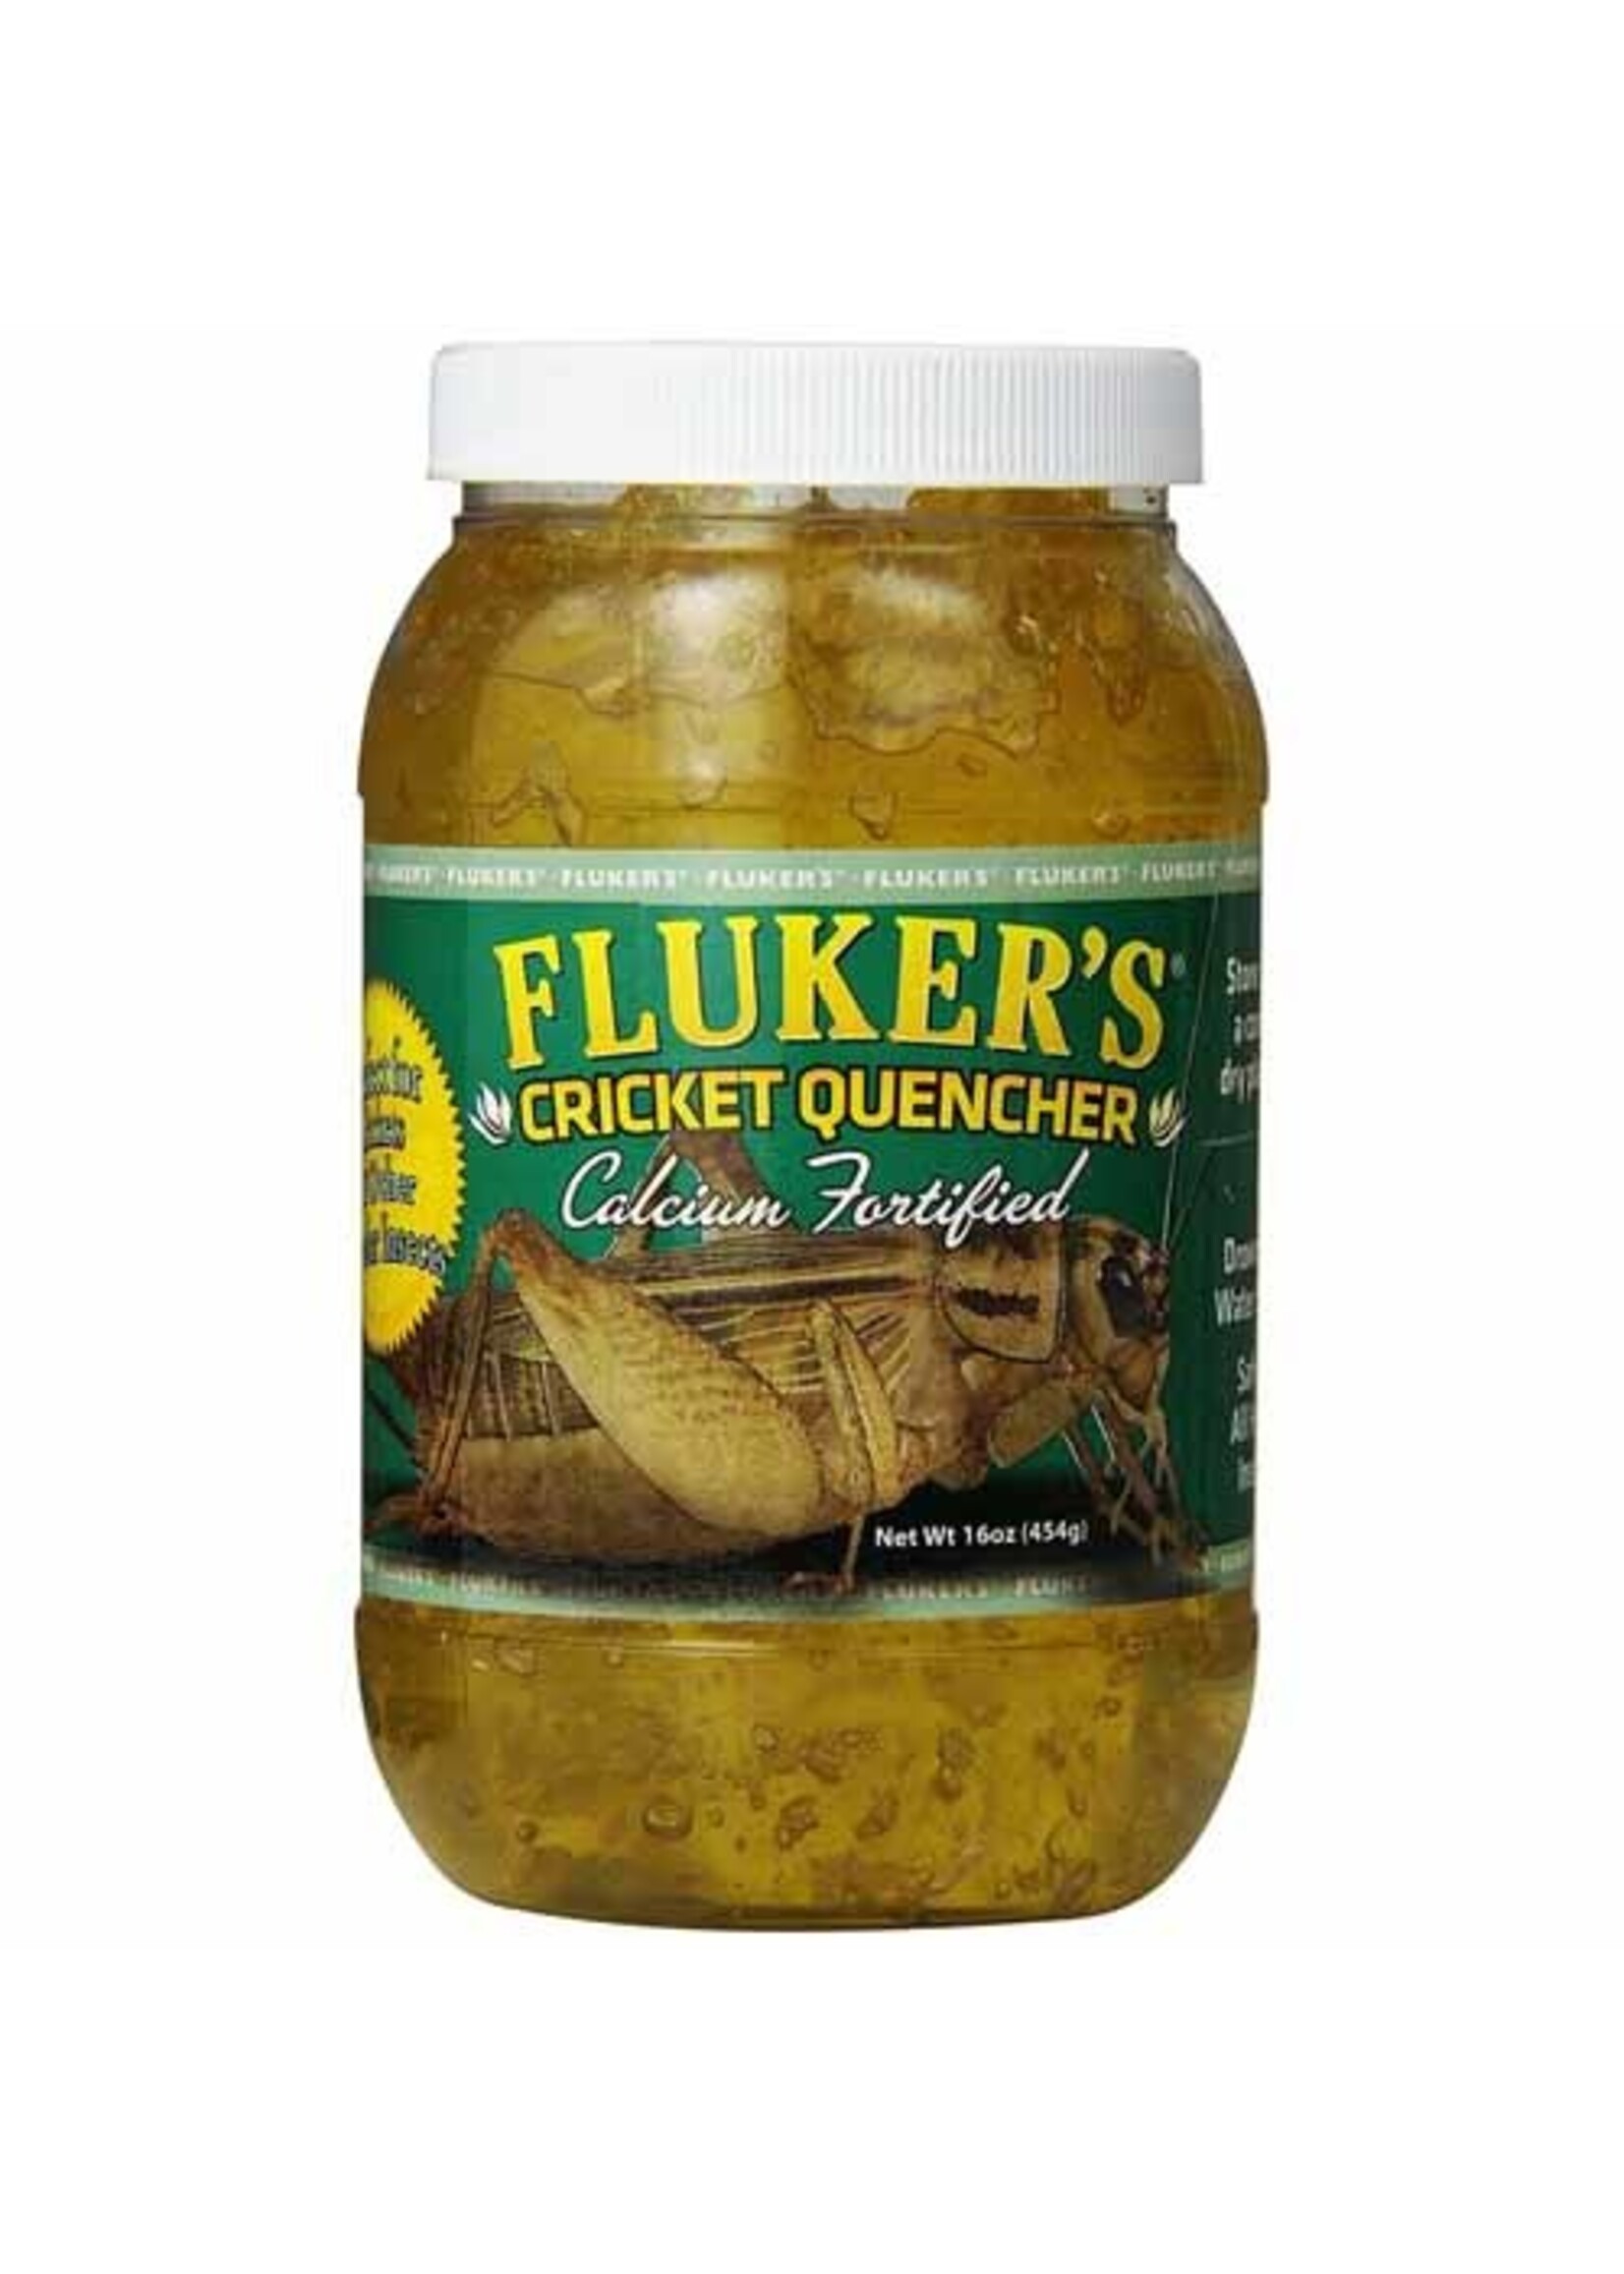 Flukers Fluker's Cricket Quencher Calciumm Fortified